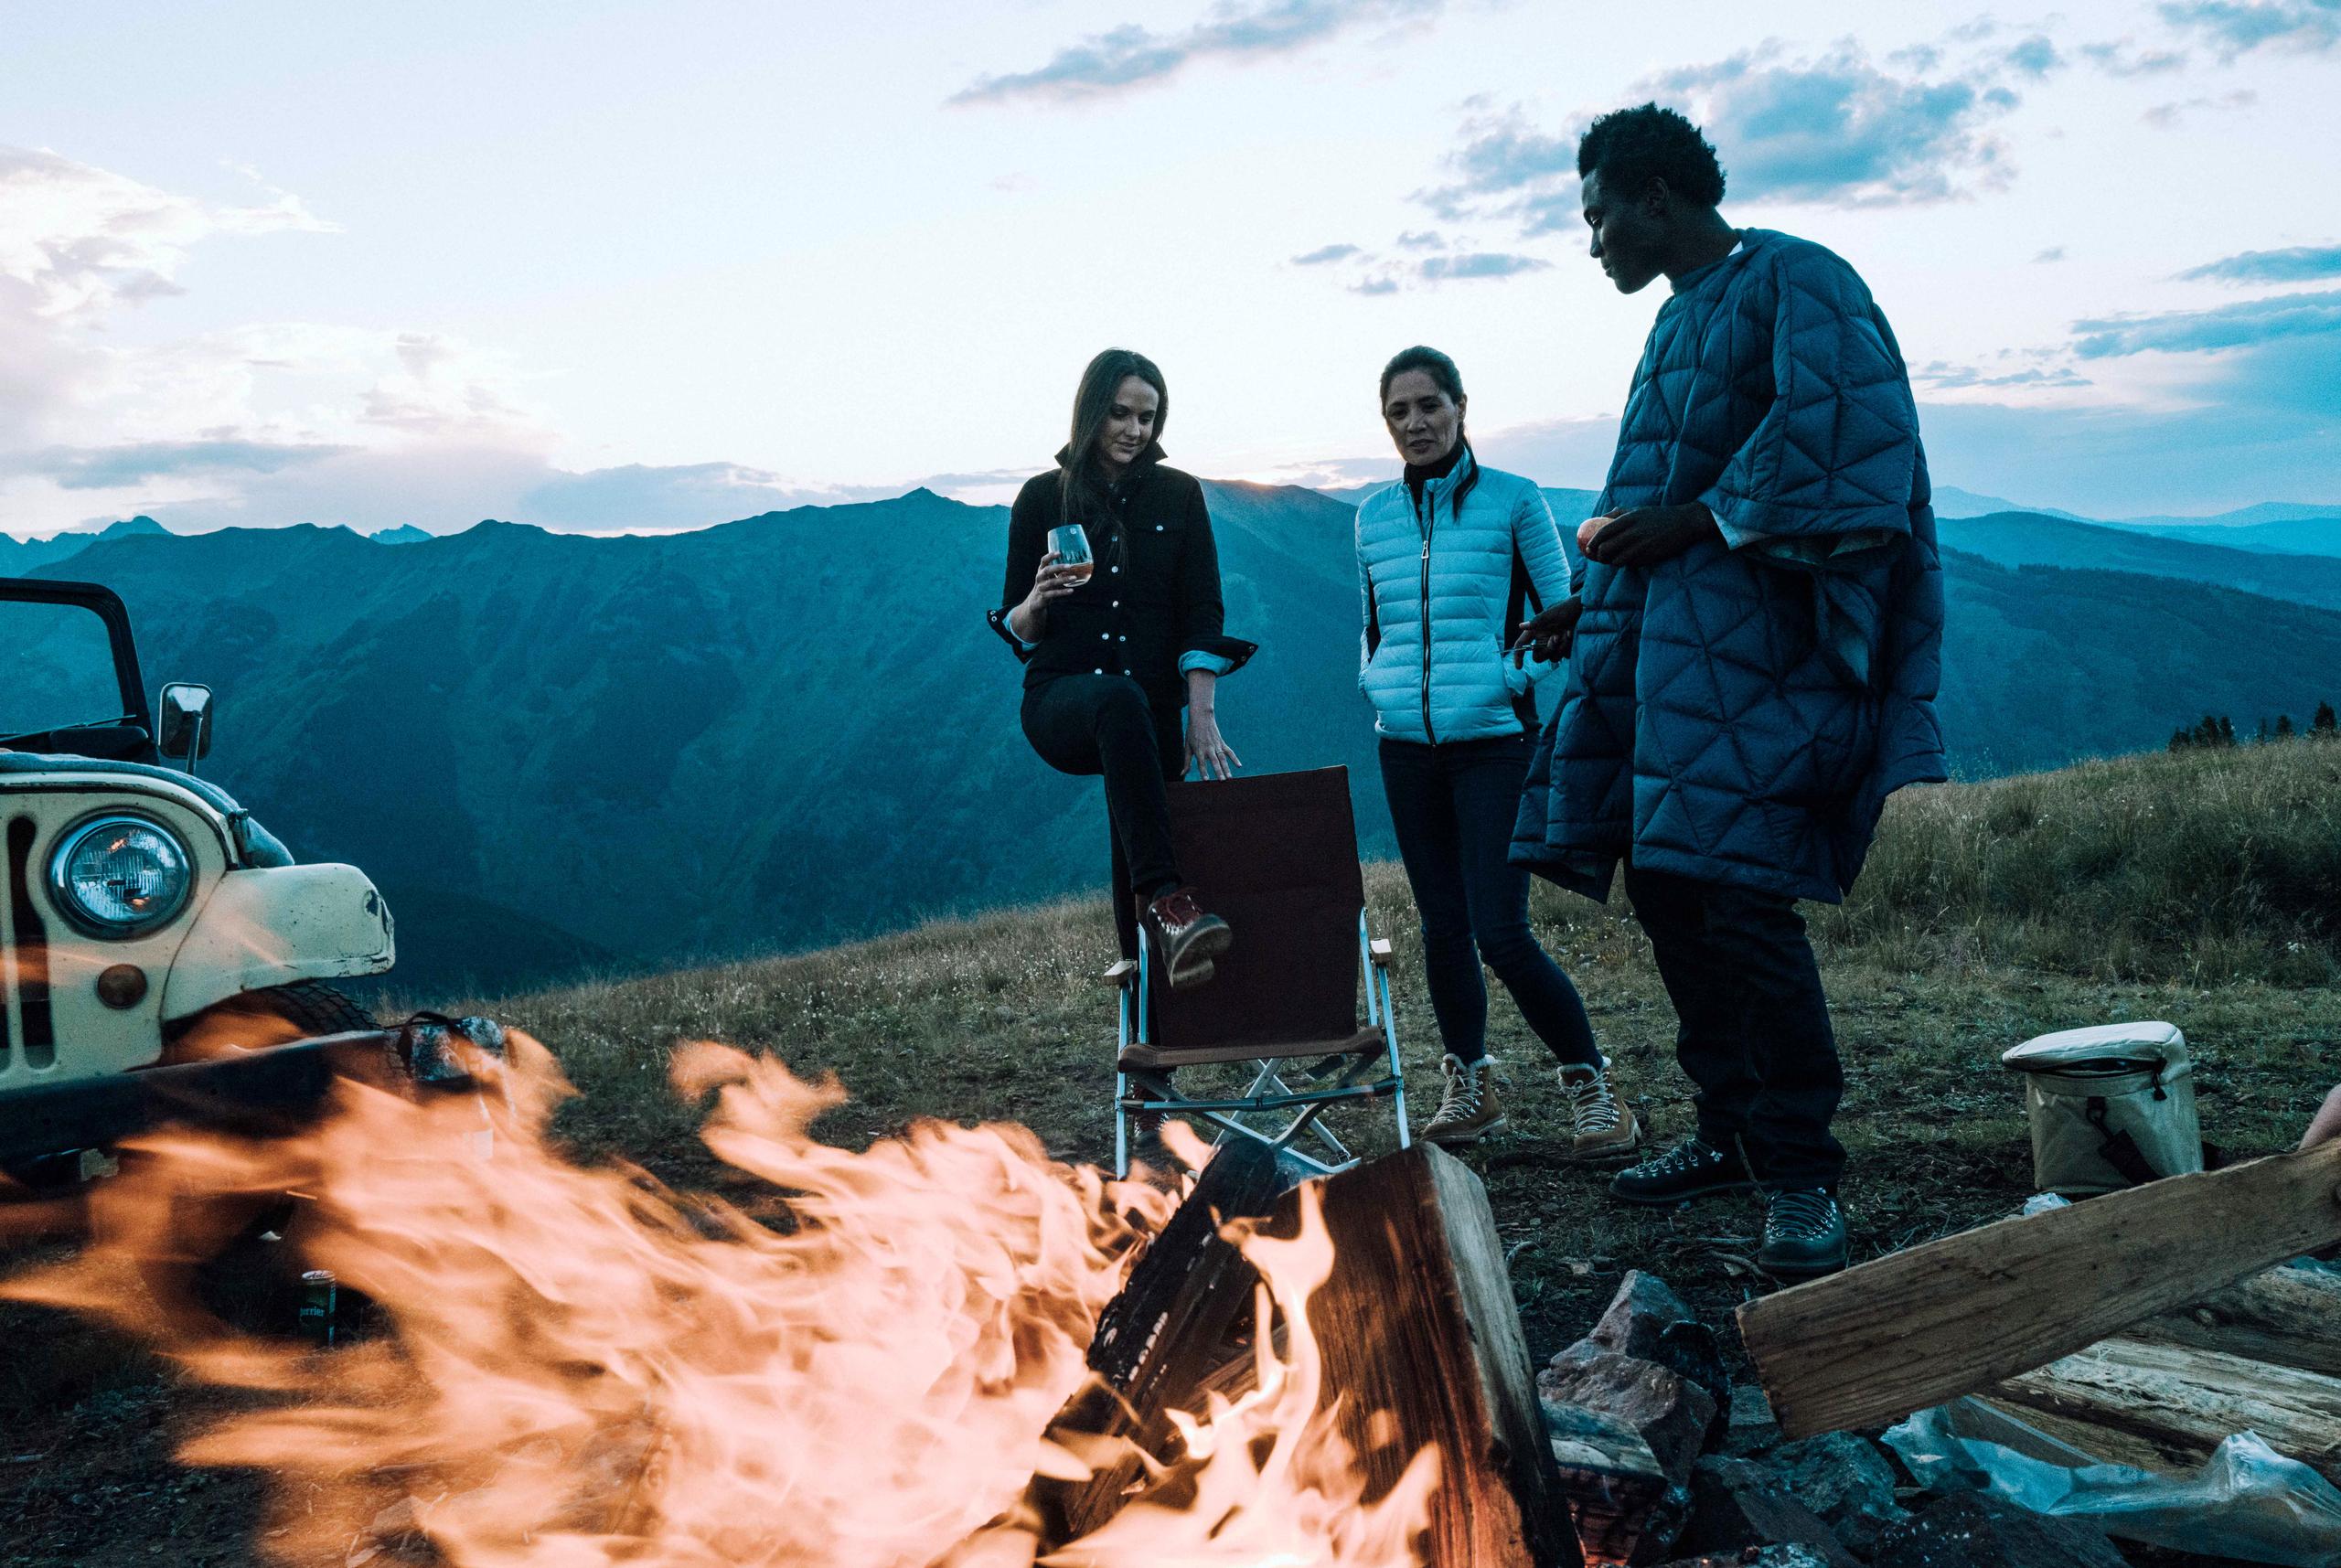 Two women and man standing around campfire alongside vintage Jeep in Aspen mountains